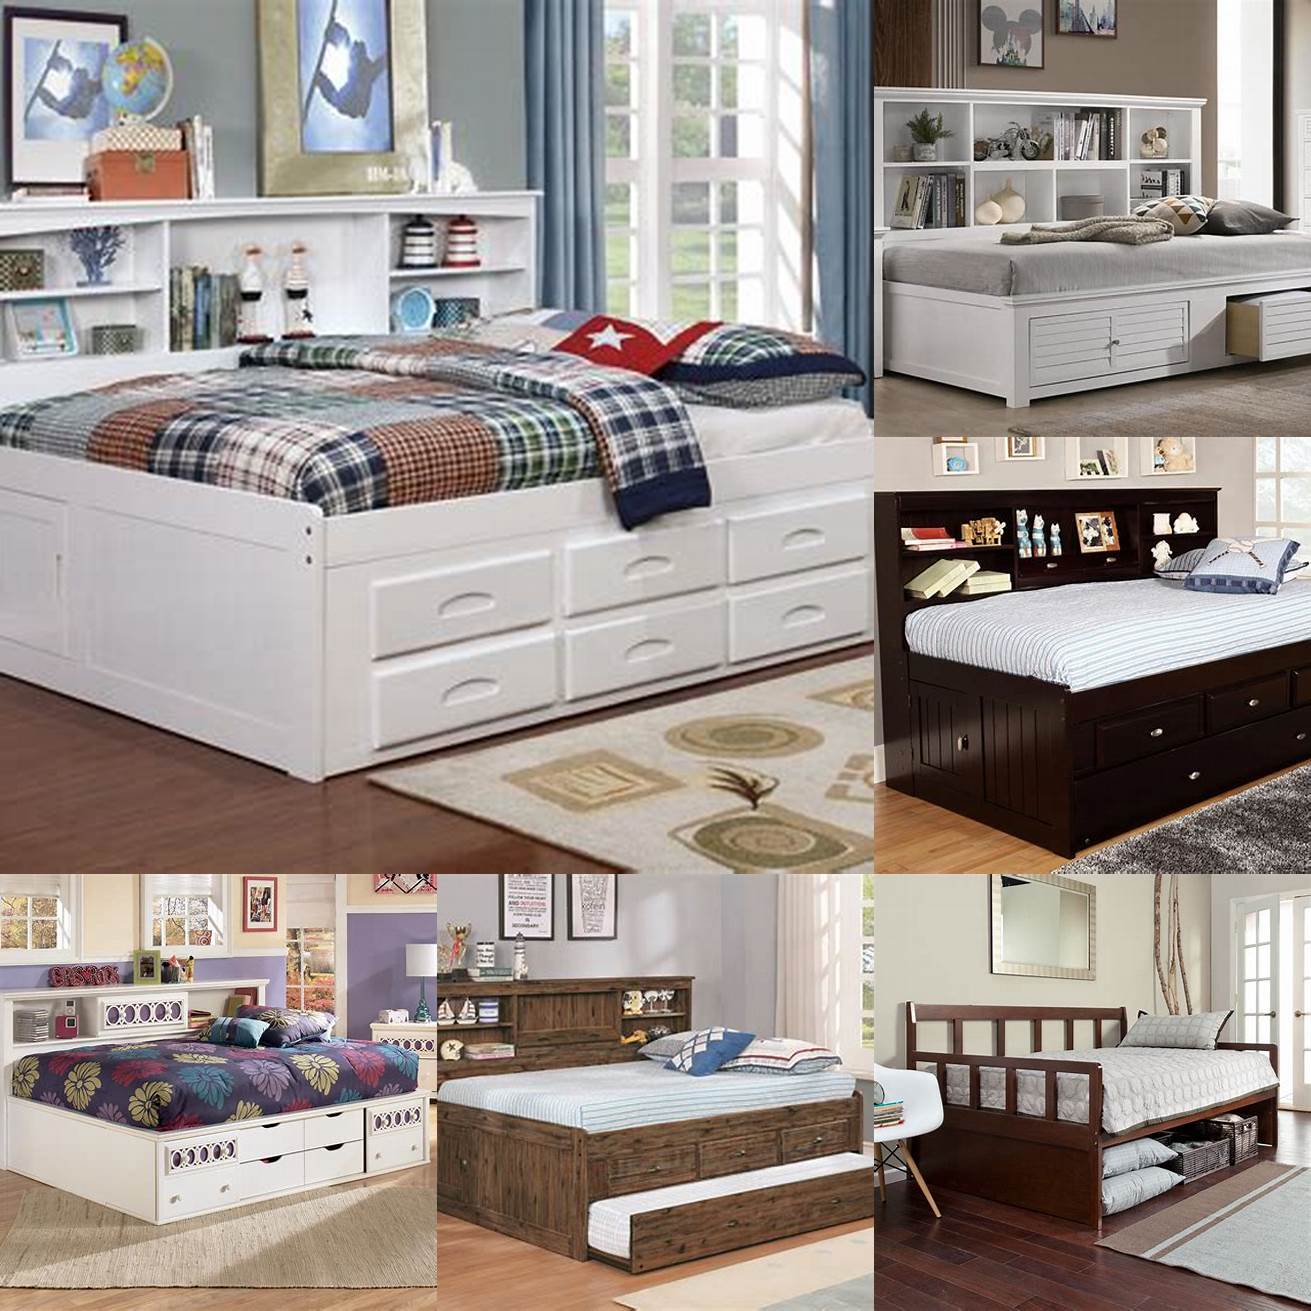 Full day bed with built-in storage